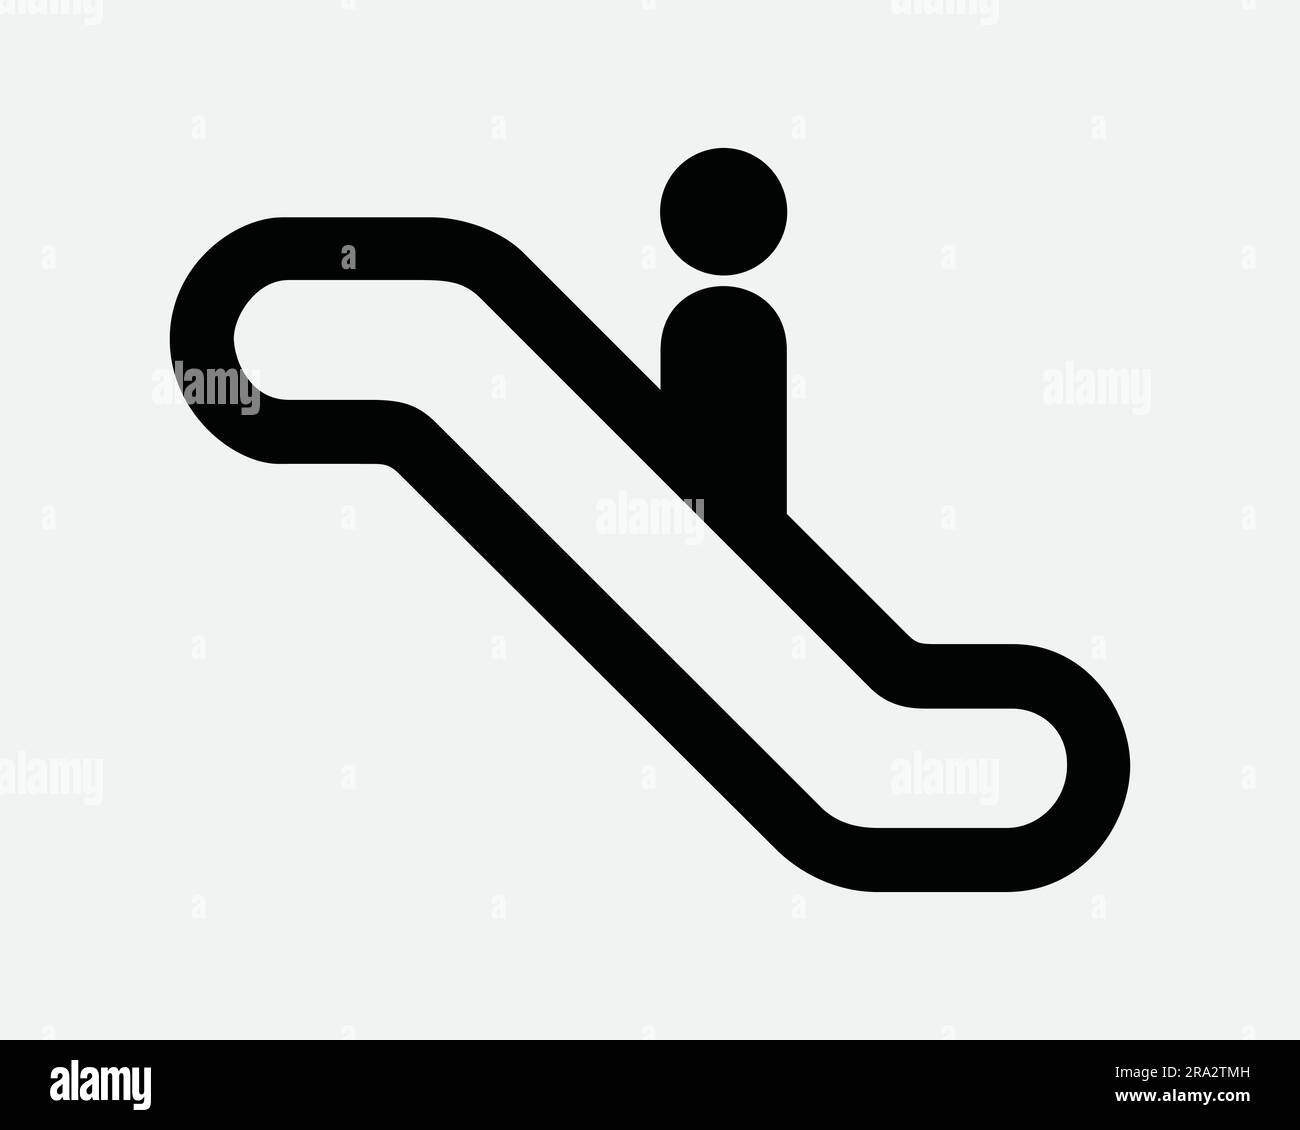 Escalator Icon. Stairs Staircase Step Up Down Walkway Elevator Label Information Info Path. Black White Graphic Clipart Artwork Symbol Sign Vector EPS Stock Vector